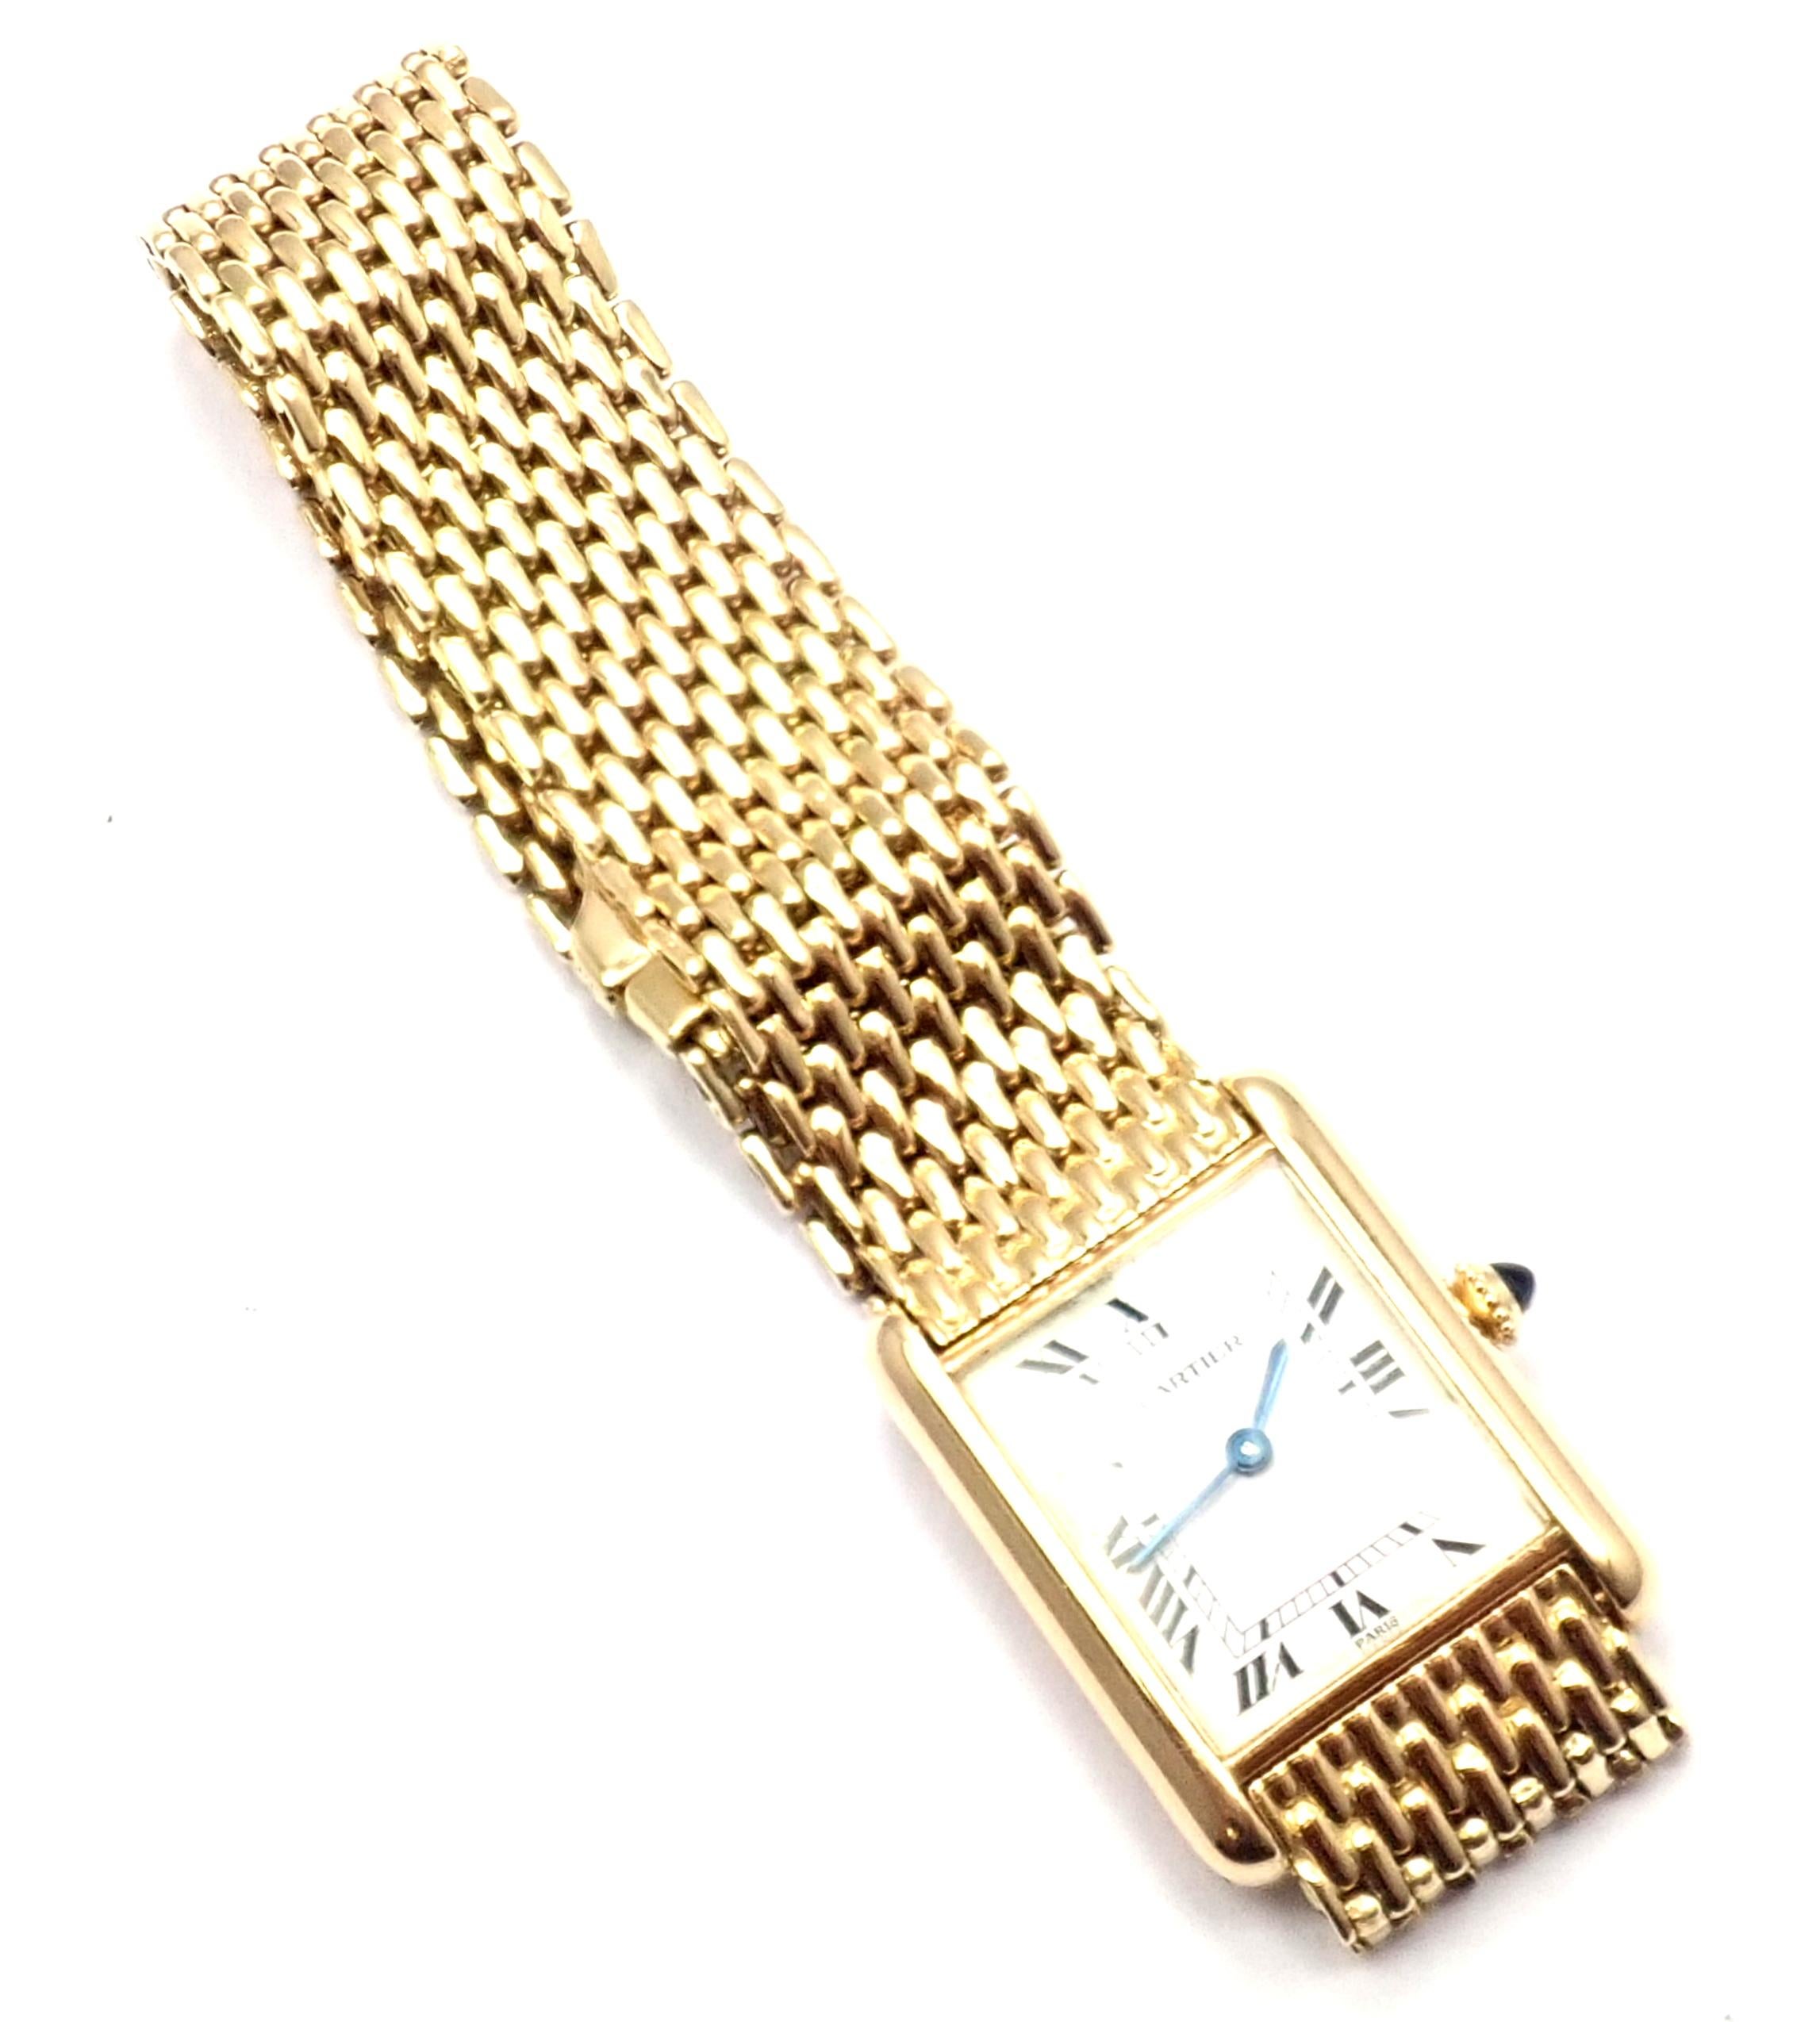 This gorgeous Cartier Tank Louis Large watch is made of 18k yellow gold and is in mint condition with a manual wide mechanical movement. This rectangular watch is part of Cartier's Tank collection. This watch also comes with an 18k yellow gold